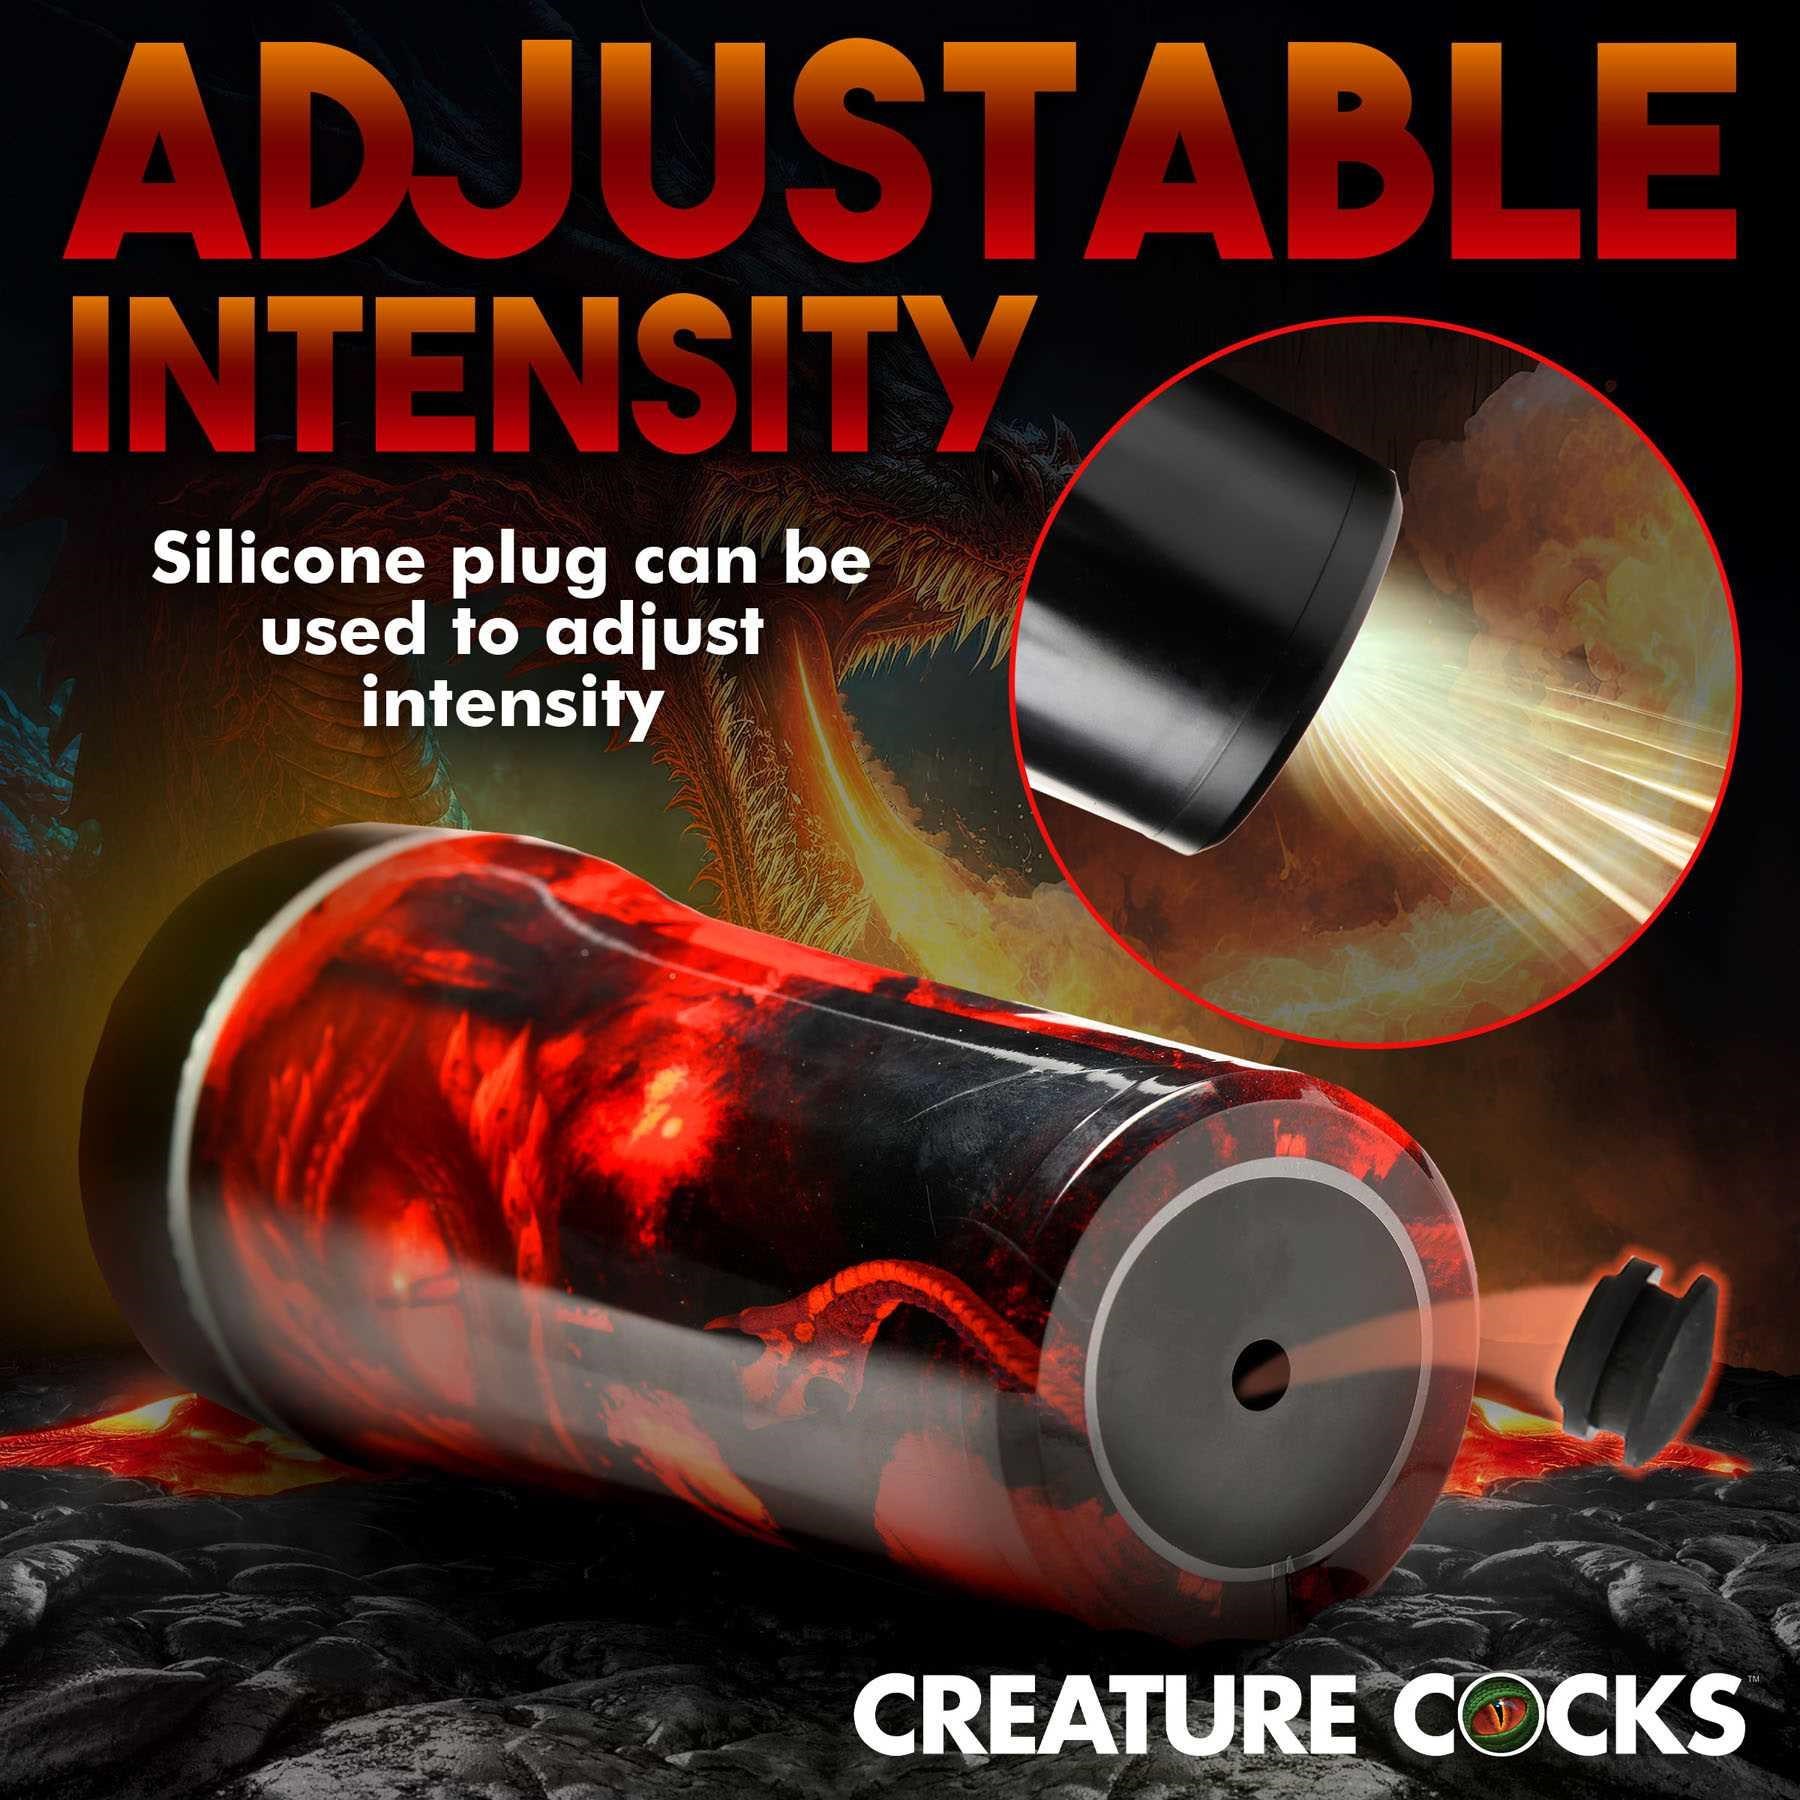 Creature Cocks Dragon Snatch Dragon Stroker adjust intensity with silicone plug for base end